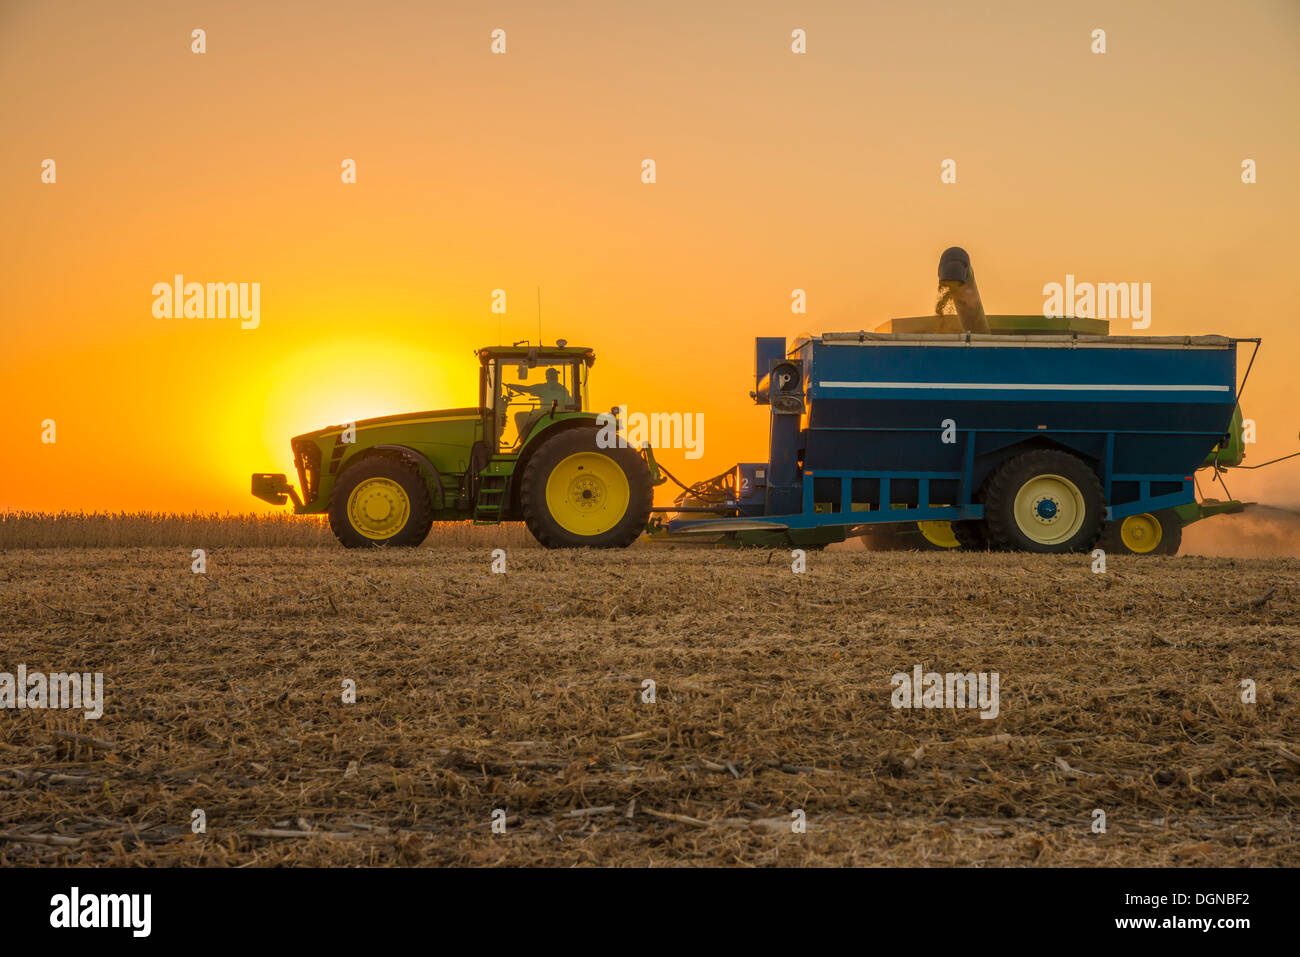 Tractor and Grain wagon in a soybean field, harvester behind grain wagon. Stock Photo